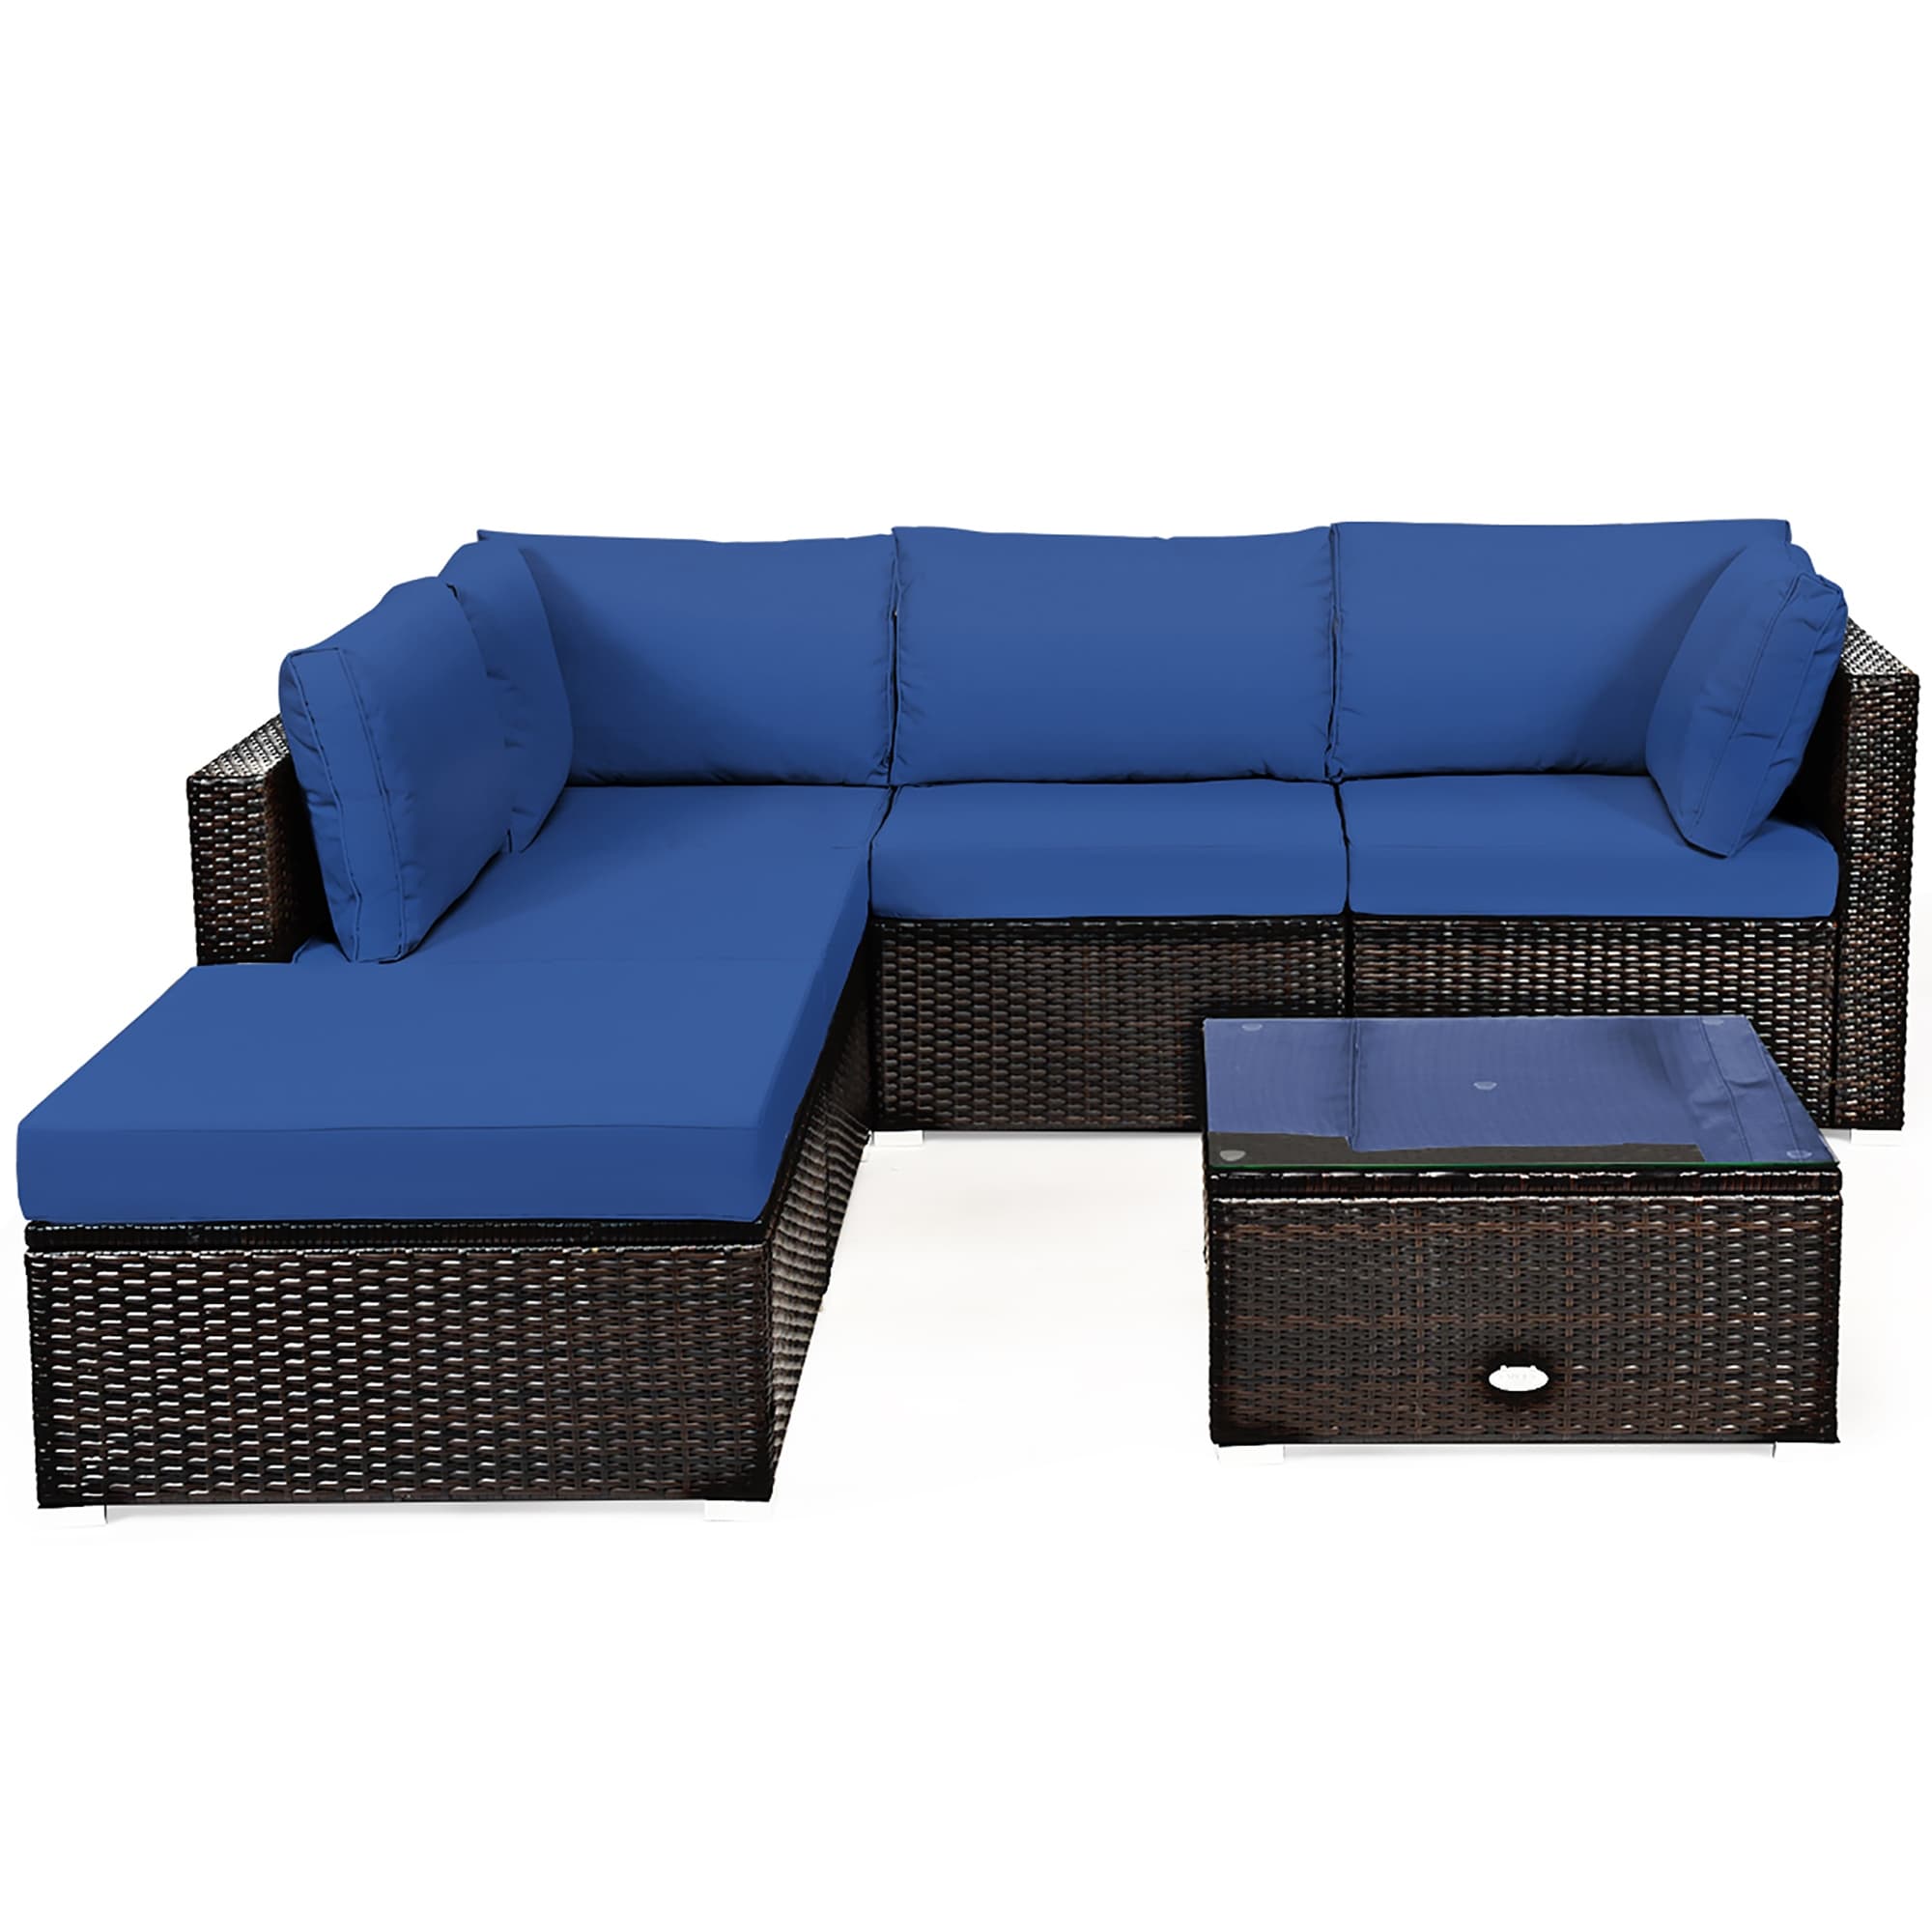 6 Piece Patio Furniture Set Outdoor Conversation Set With Coffee Table